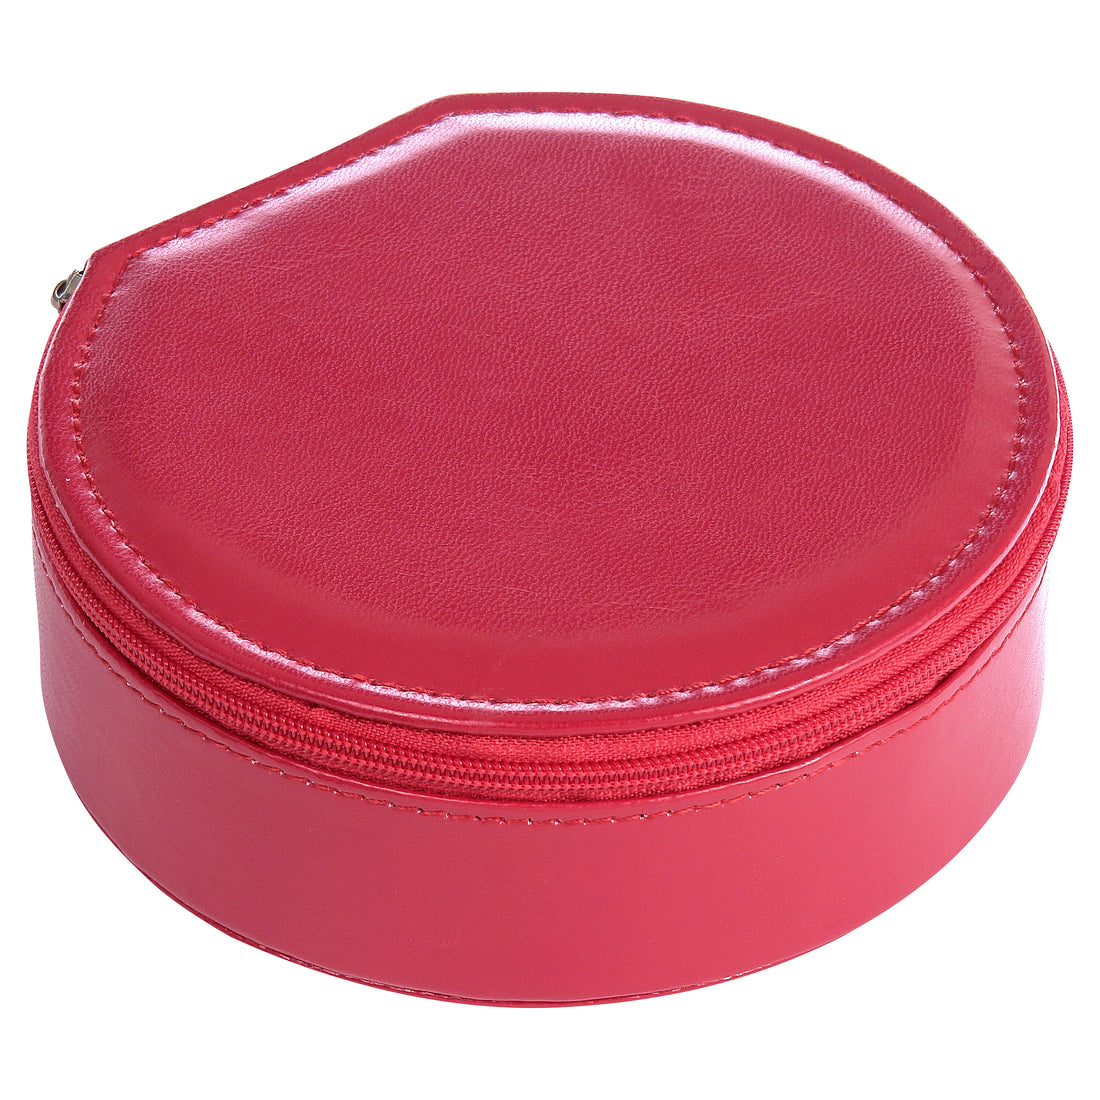 jewellery case Betsy standard / red